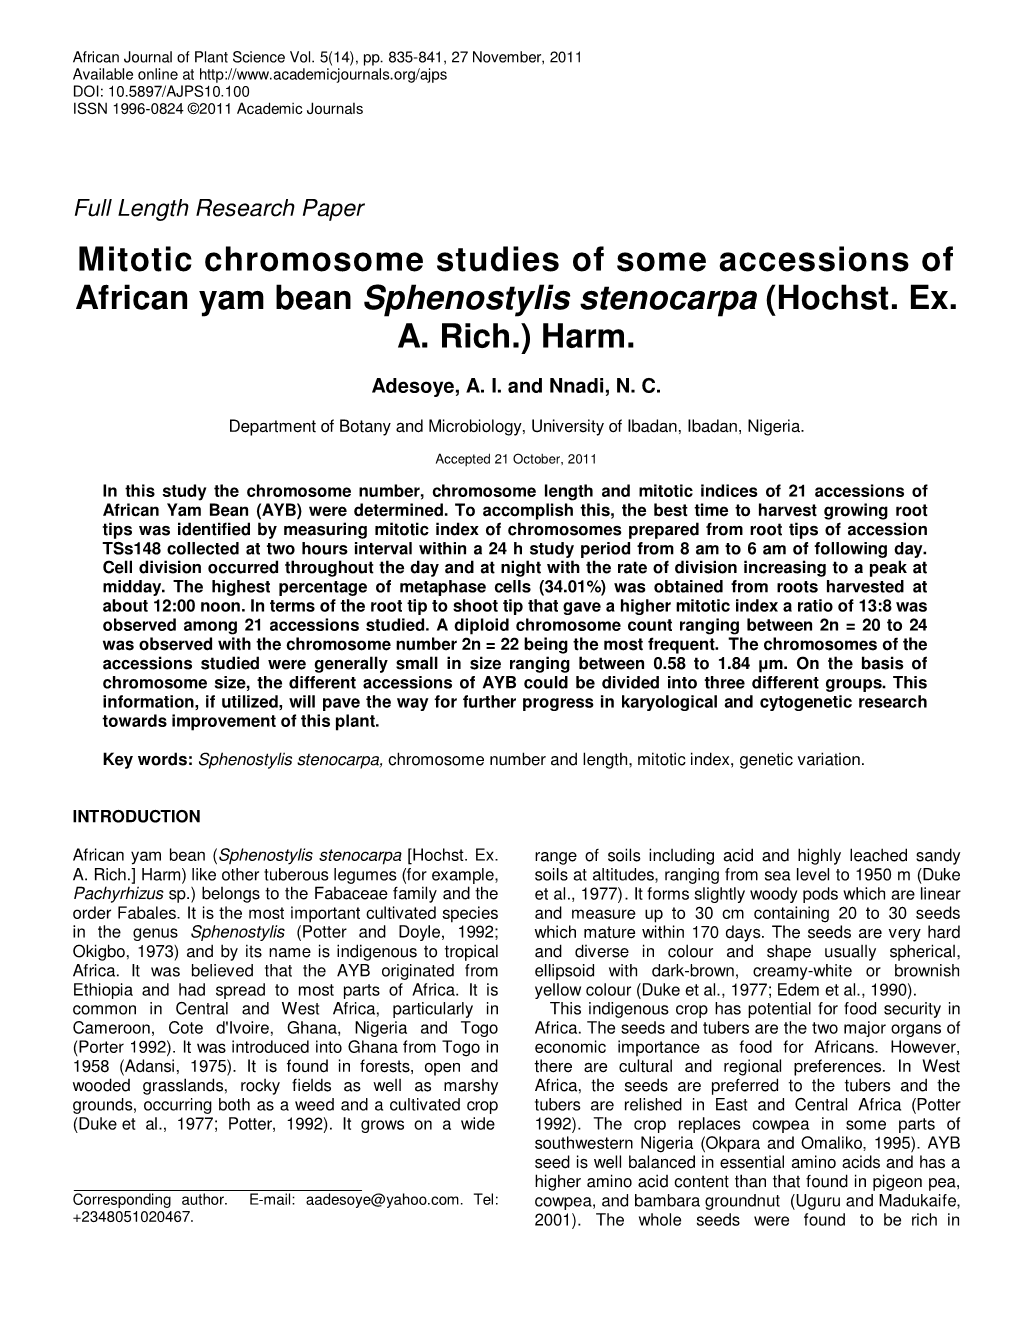 Mitotic Chromosome Studies of Some Accessions of African Yam Bean Sphenostylis Stenocarpa (Hochst